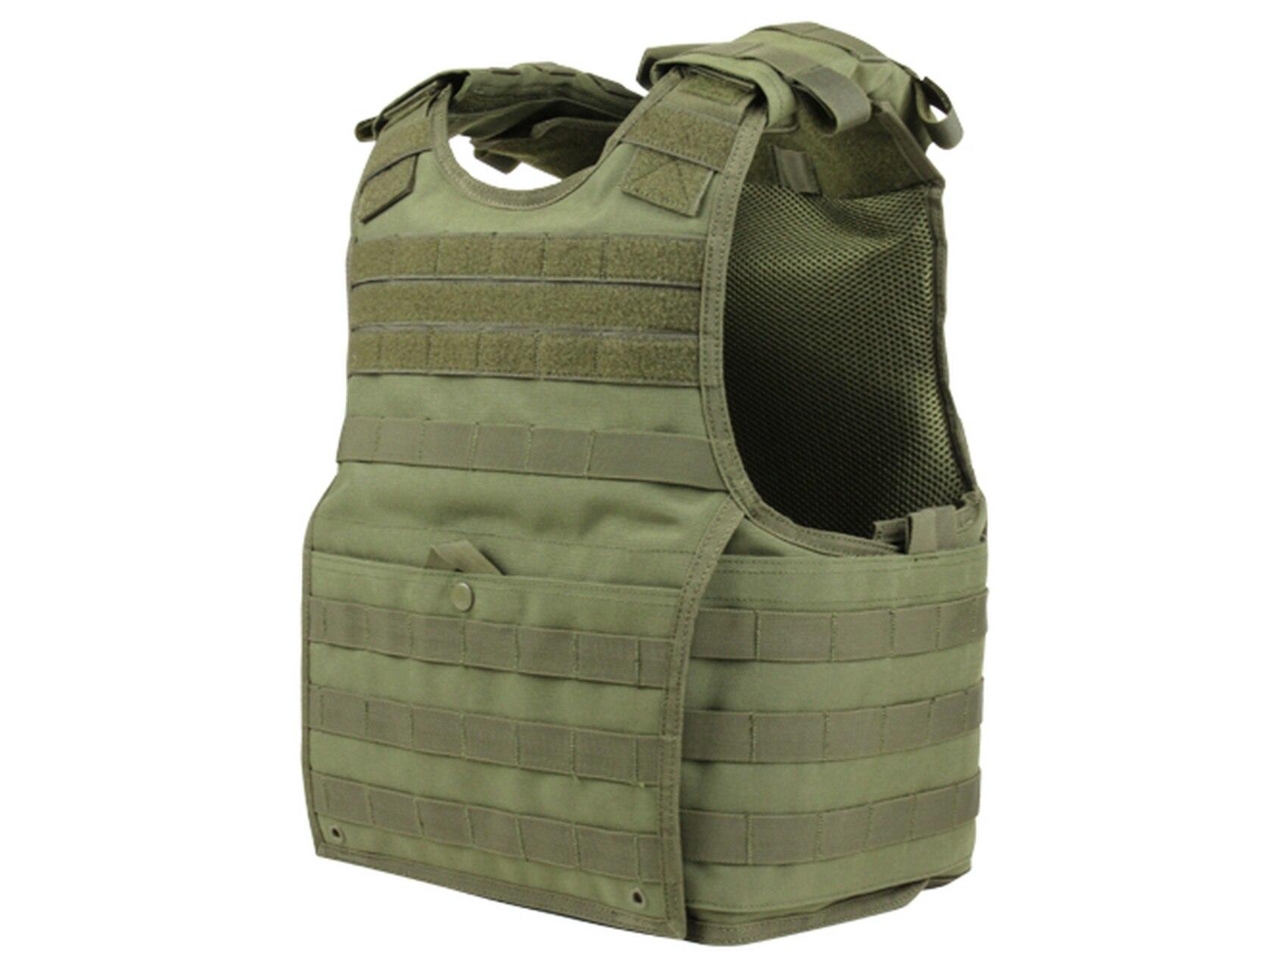 Image of Condor MOLLE Exo Plate Carrier - S/M Olive Drab Small ID 022886265359